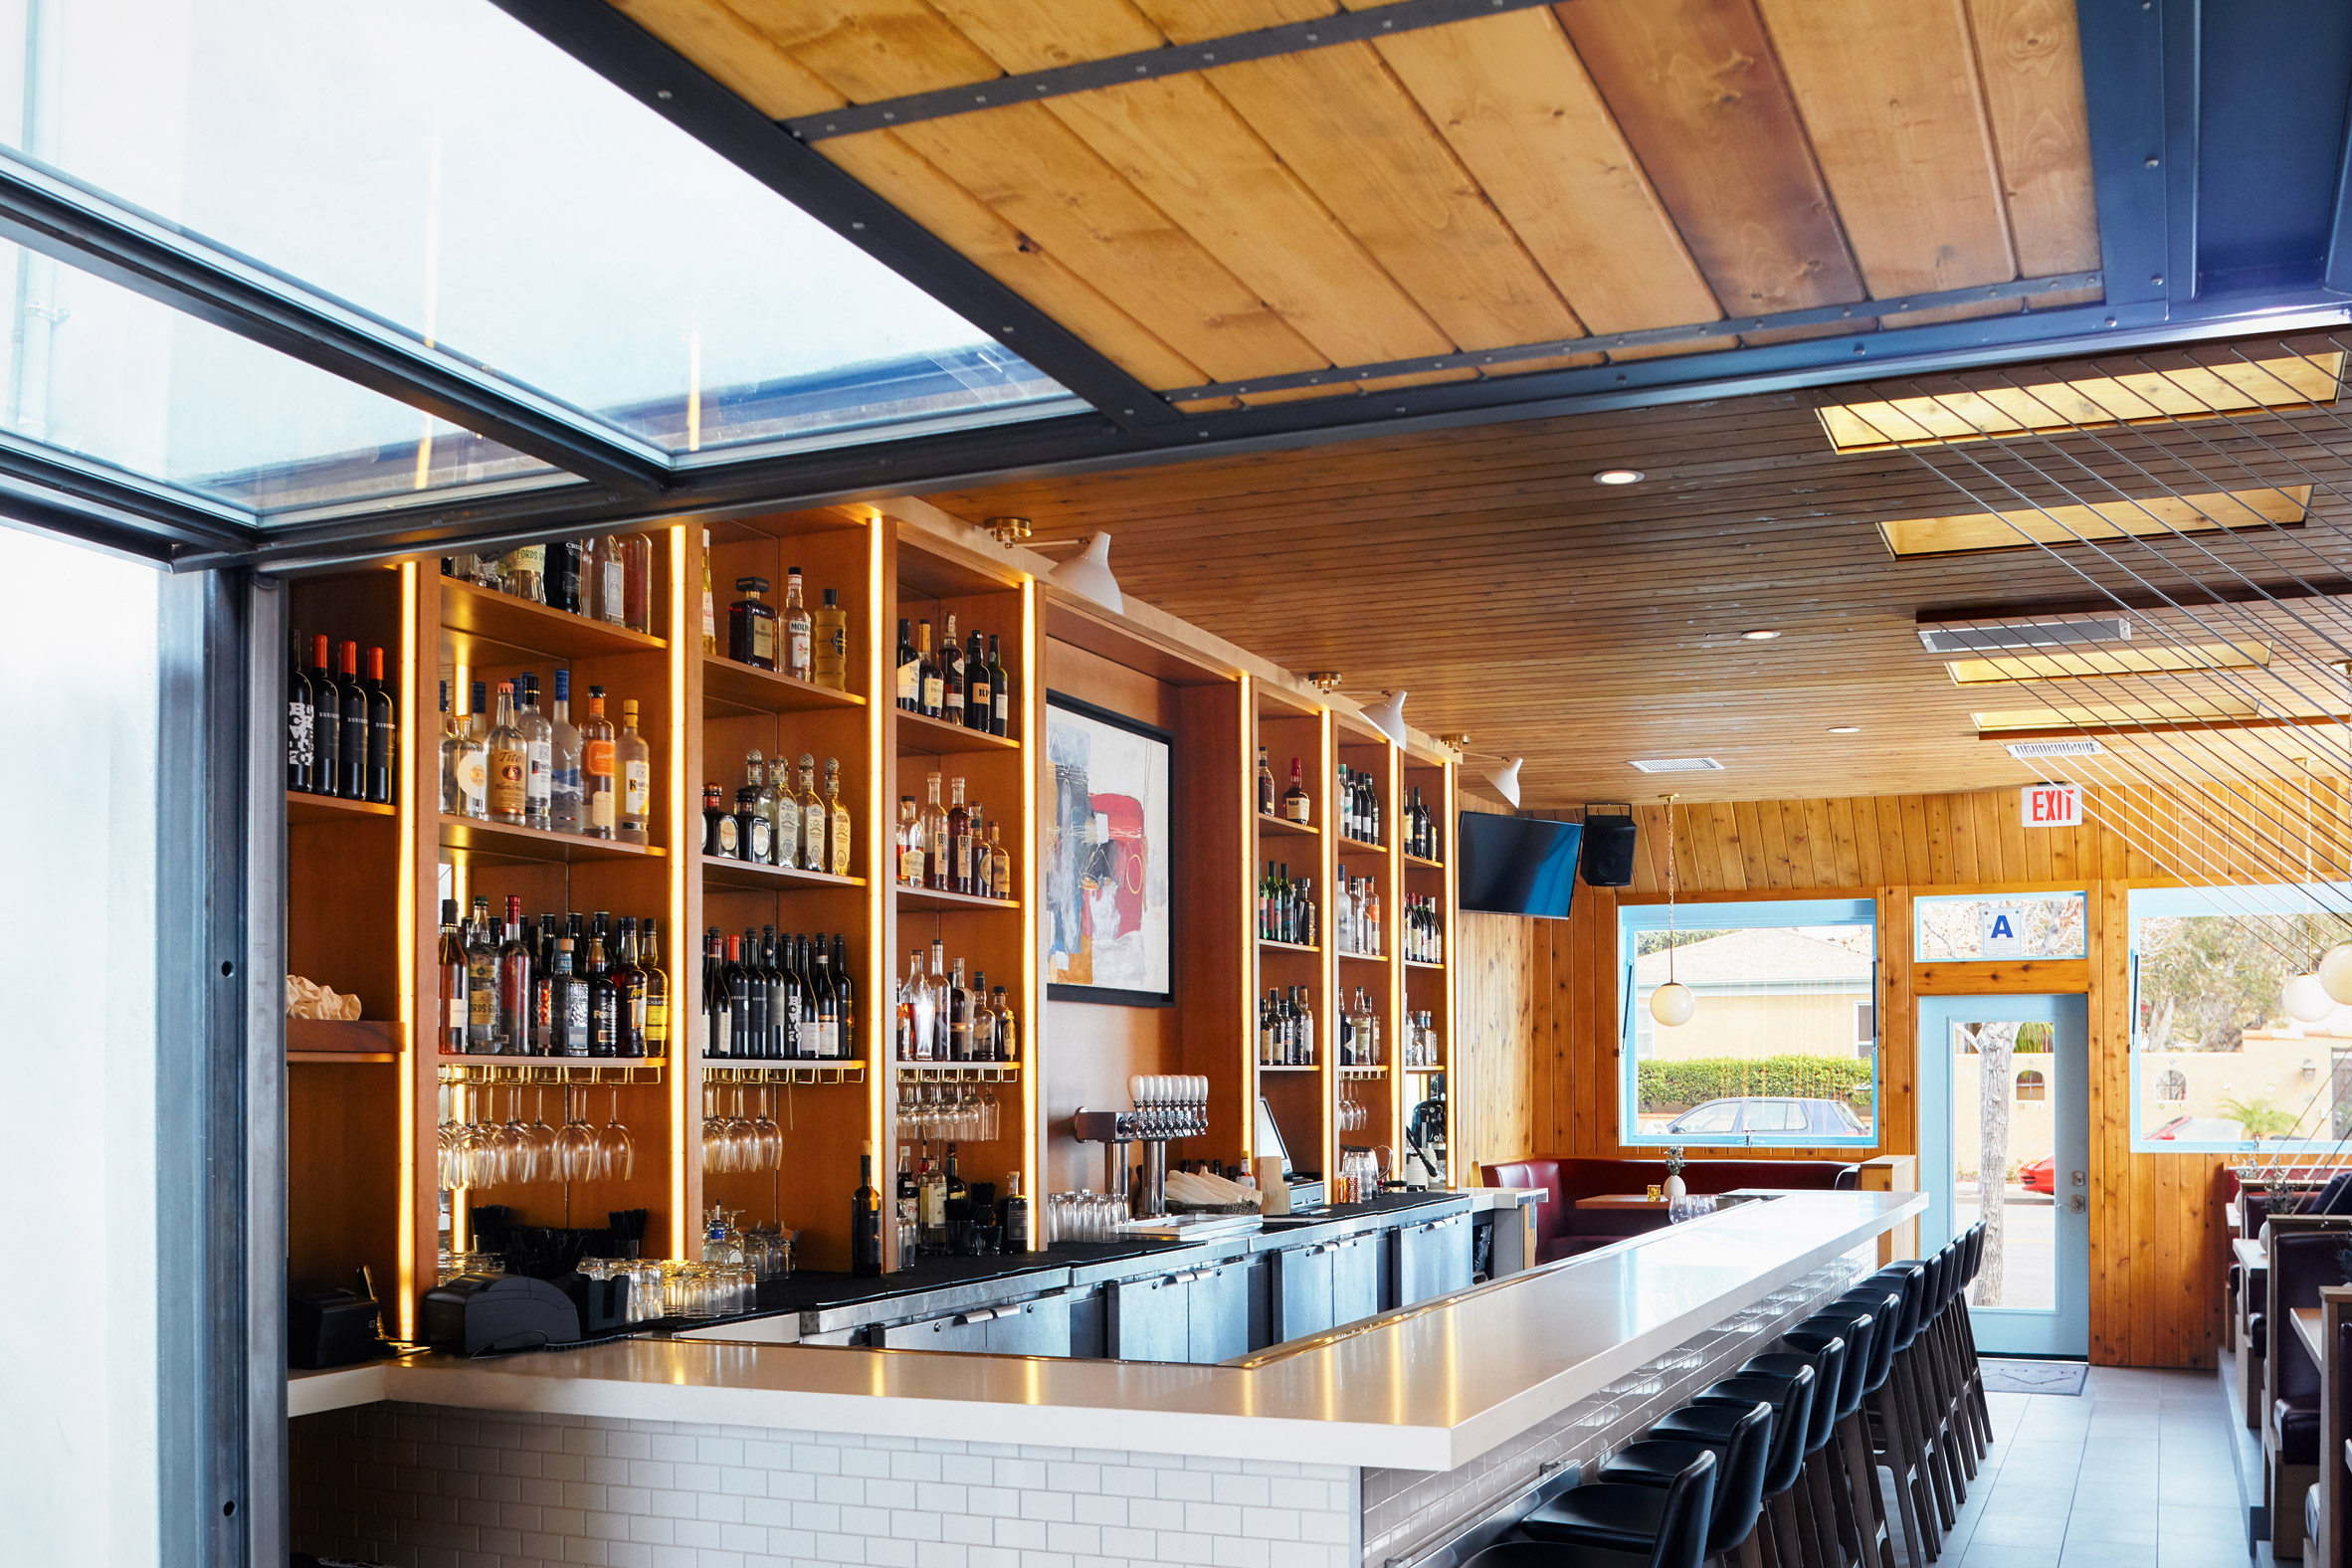 Cedar-clad ceiling arches over San Diego restaurant by Archisects